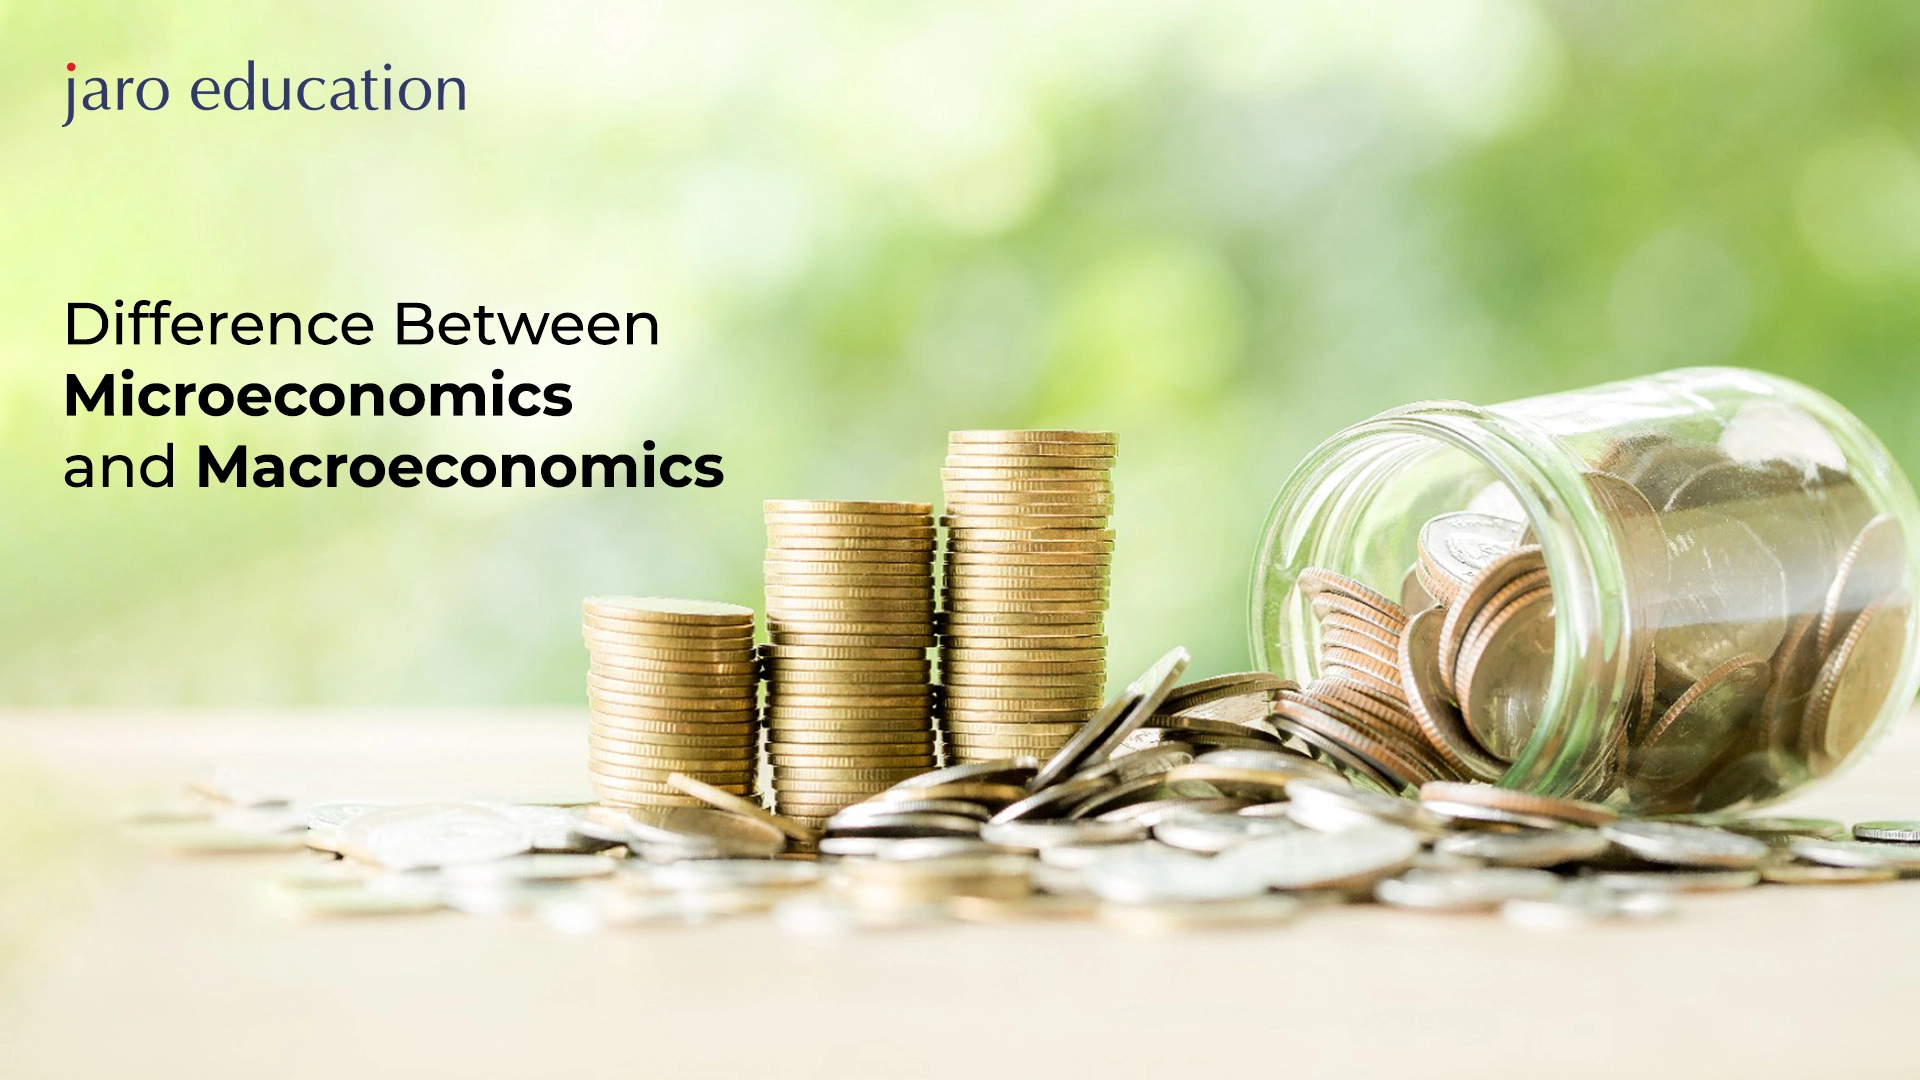 Difference-Between-Microeconomics-and-Macroeconomics-_1_ blog